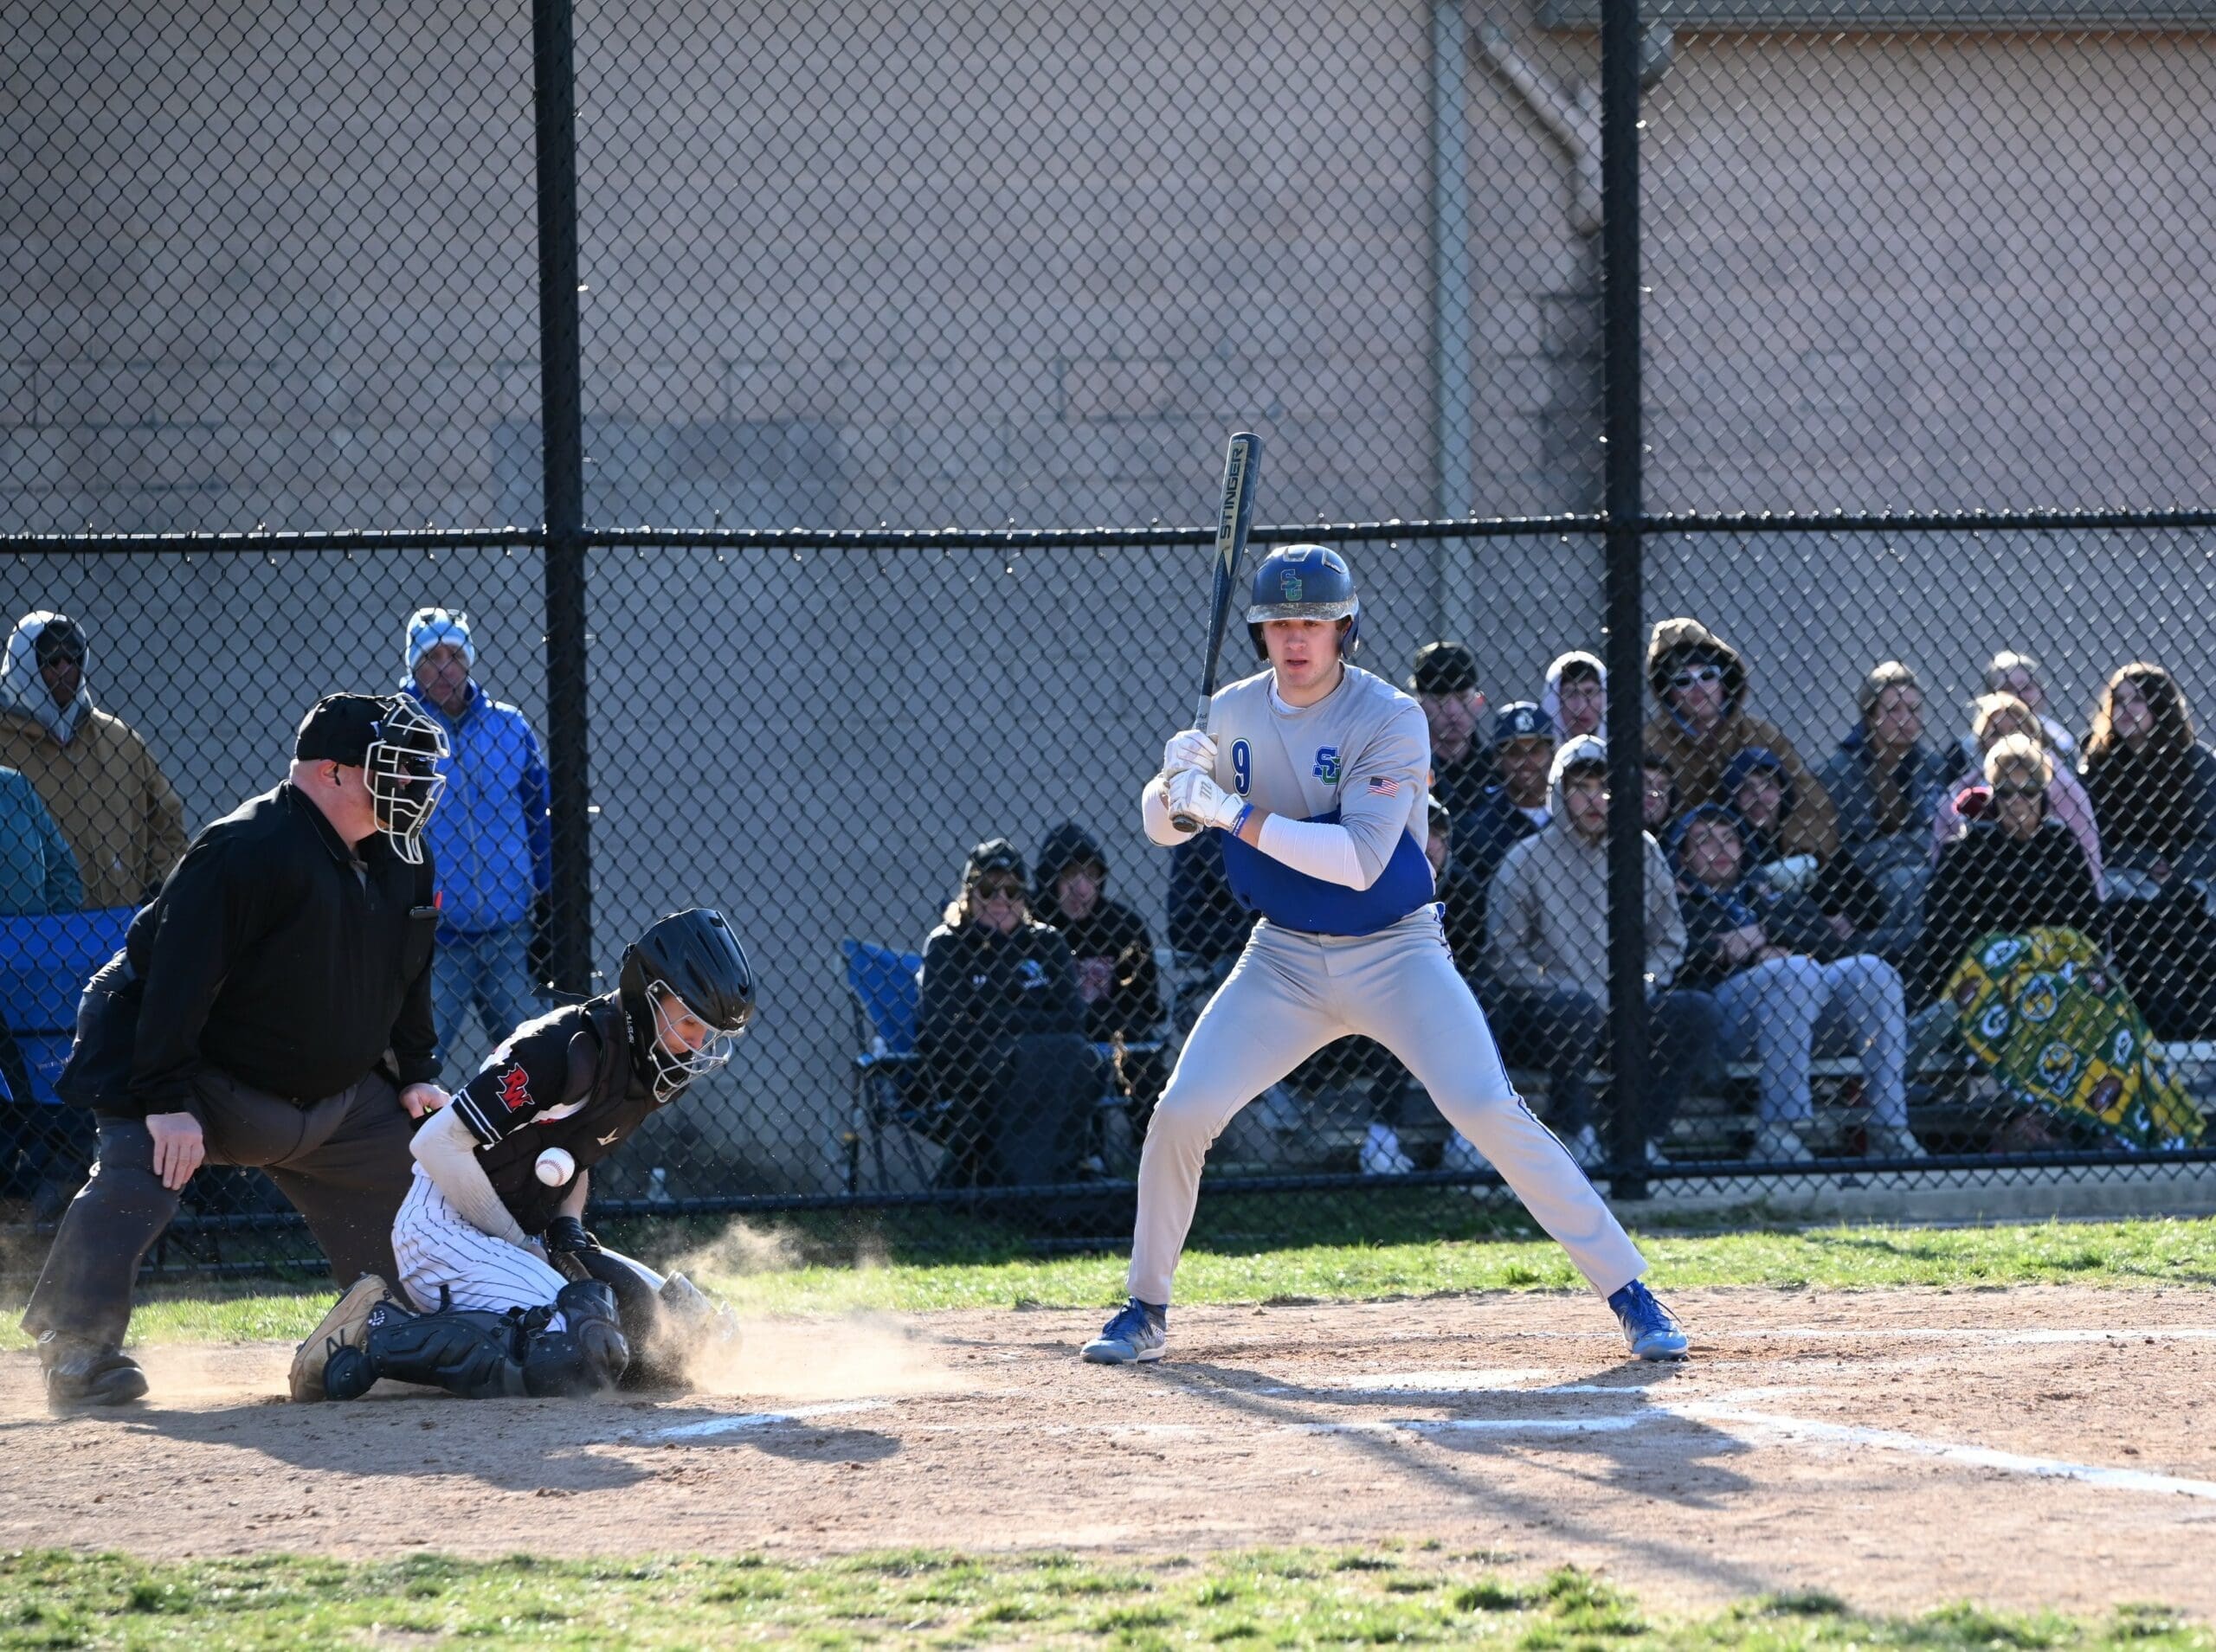 St Georges baseball Nate Arterbridge went 2 for 3 with 3 RBIs and a home run in the victory over Conrad photo courtesy of Nick Halliday scaled